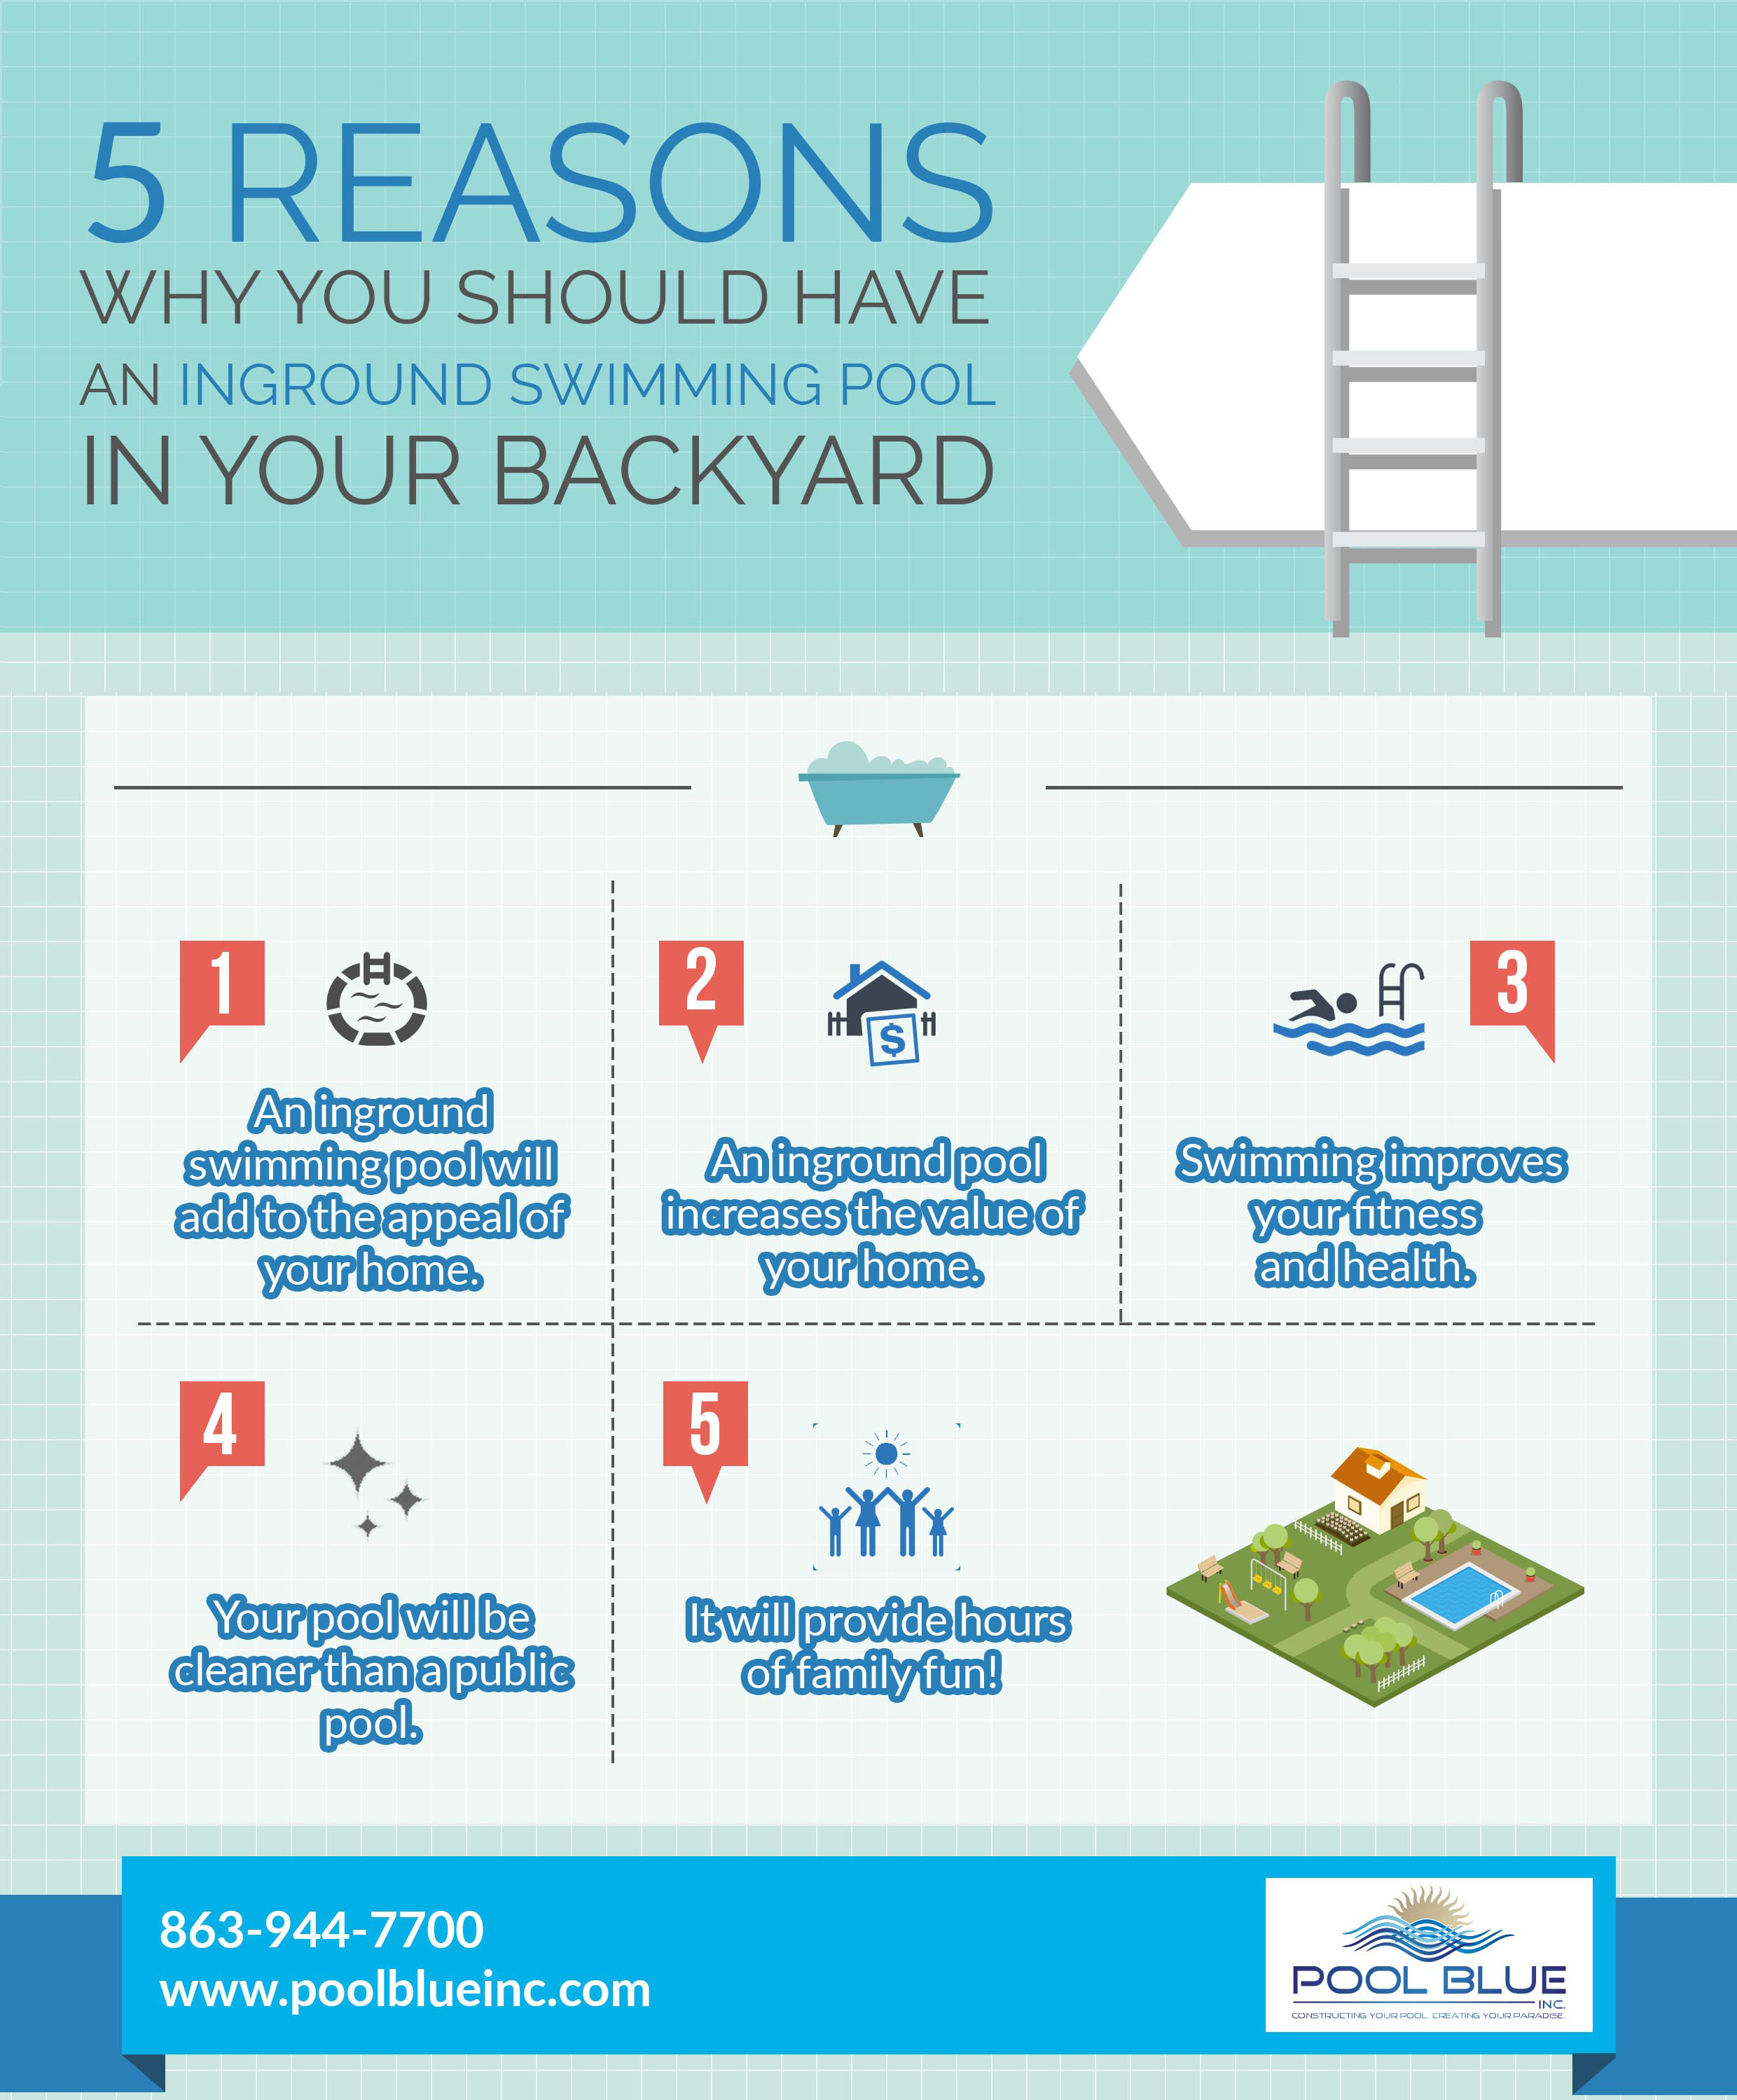 5 Reasons Why You Should Have an Inground Swimming Pool Installed in Your Backyard